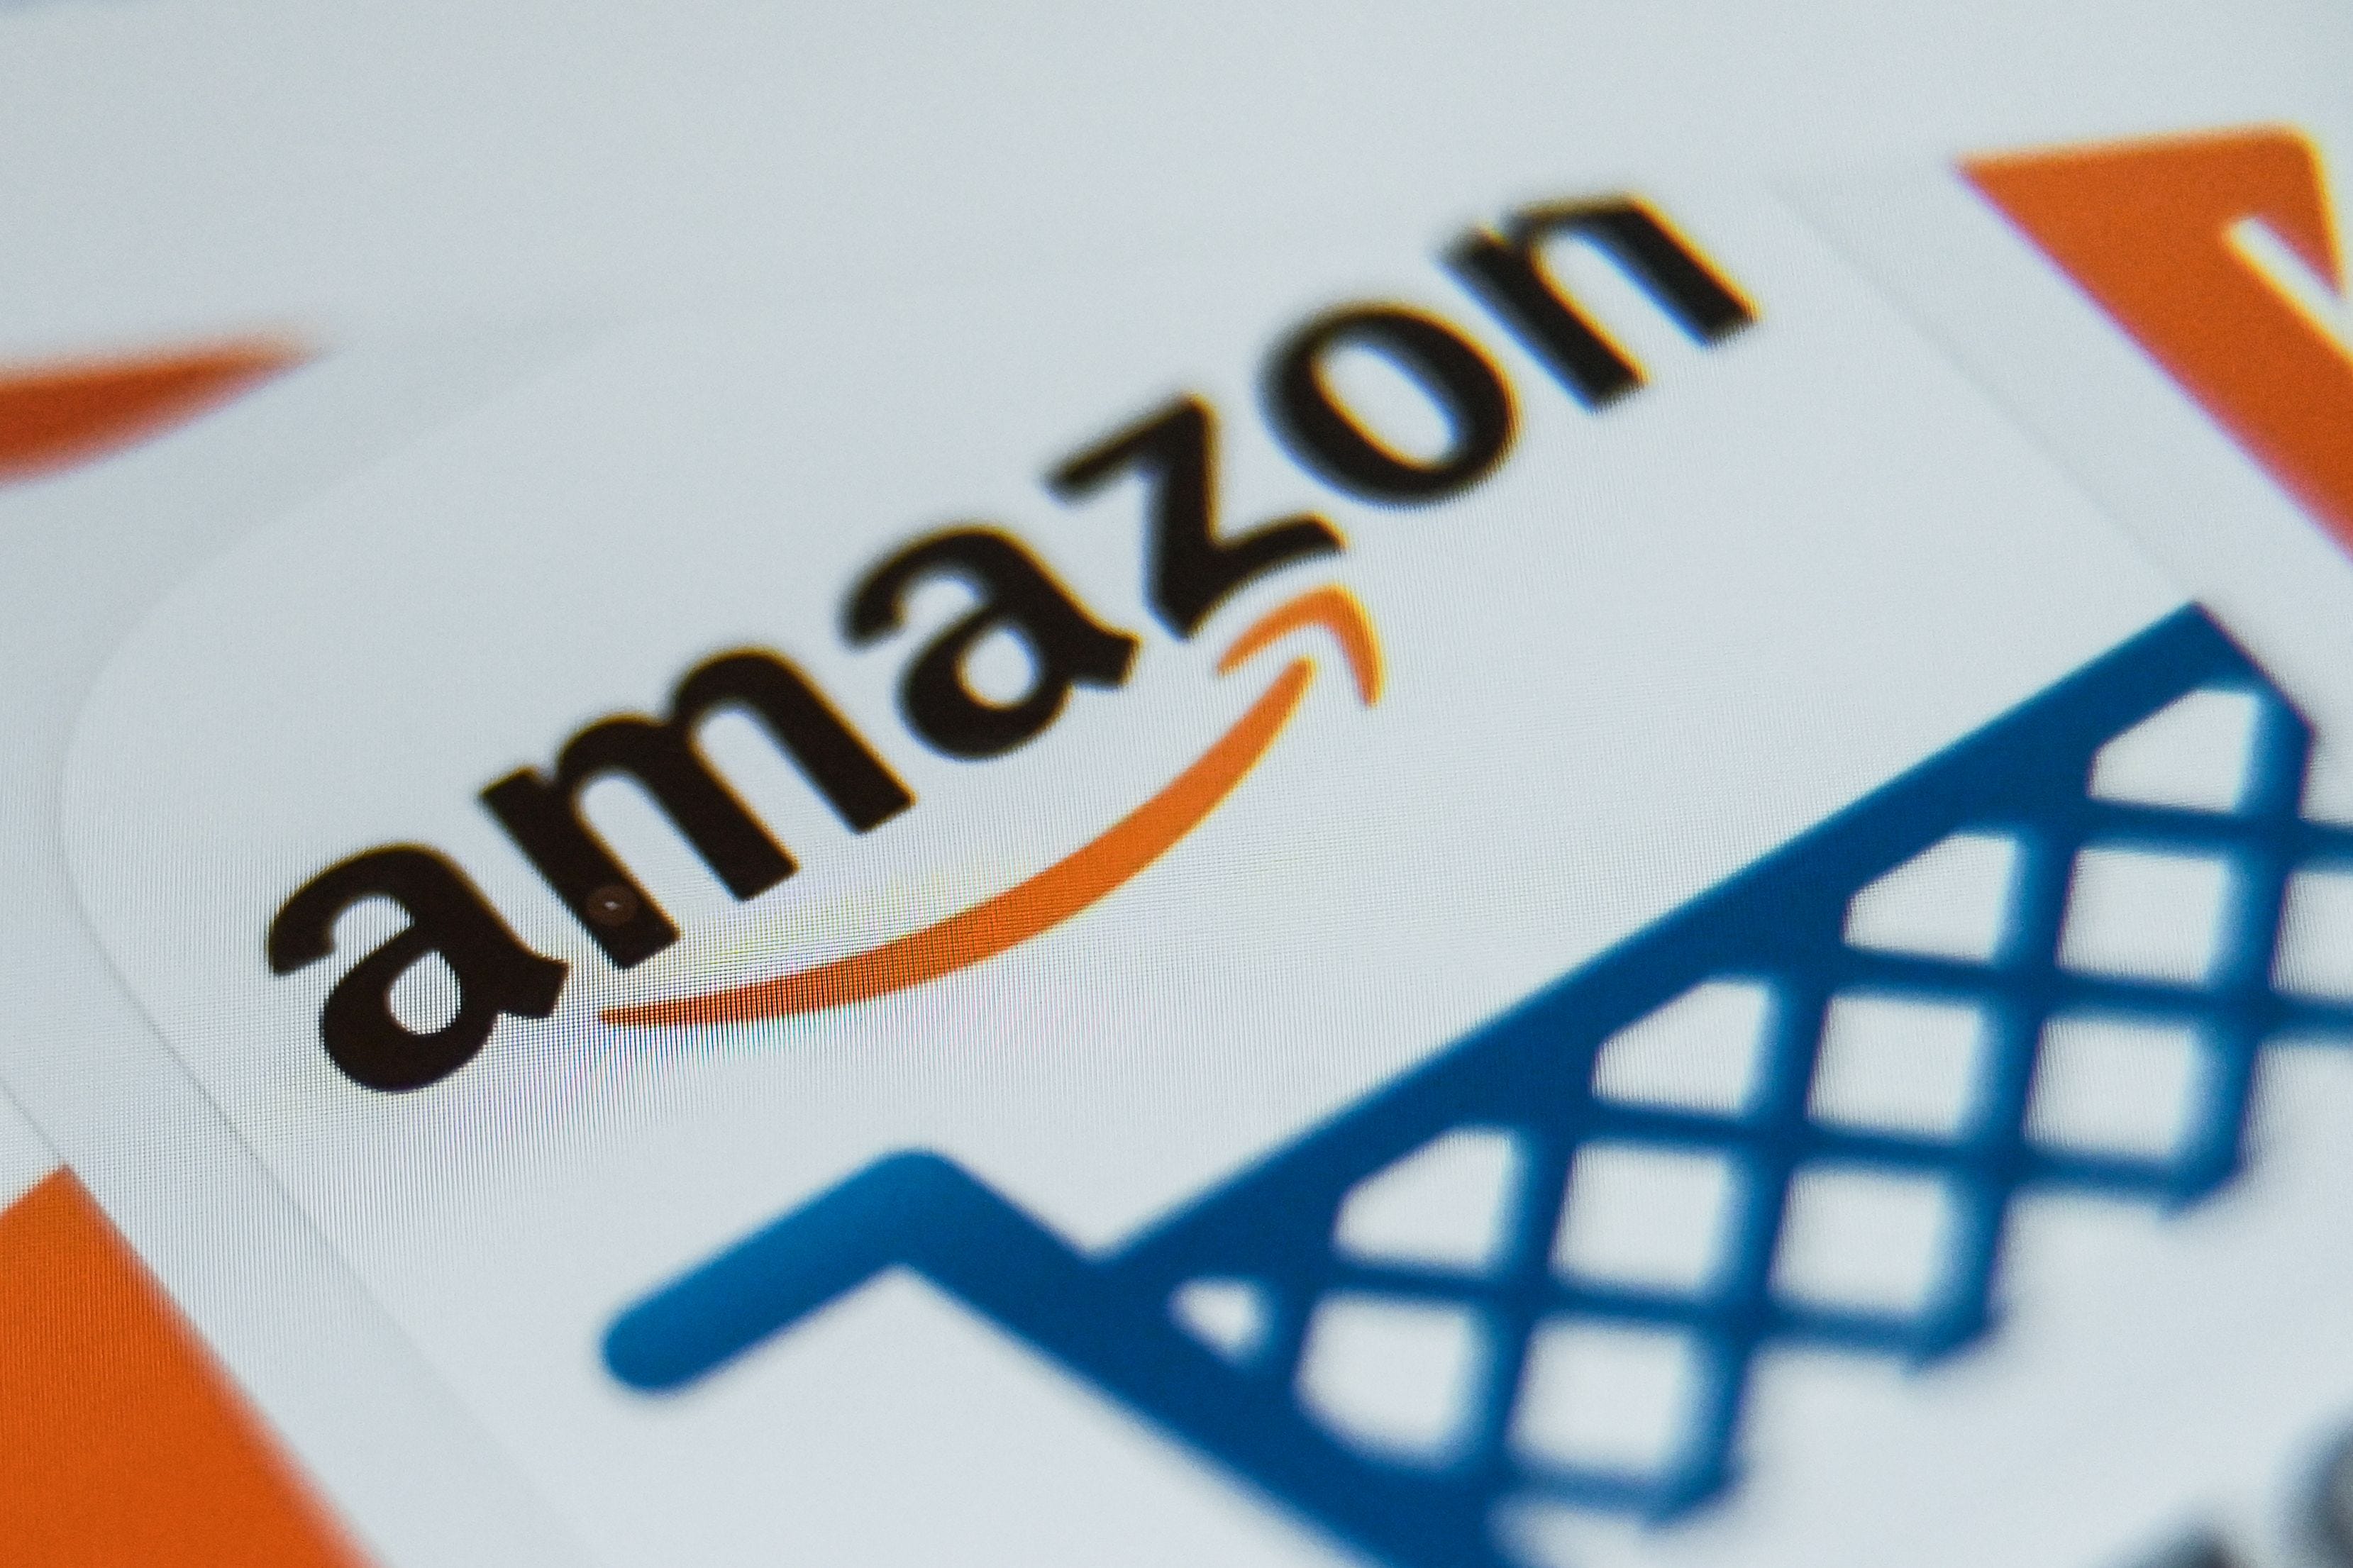 Can You Shop Online And Pay With Cash Amazon Says Yes